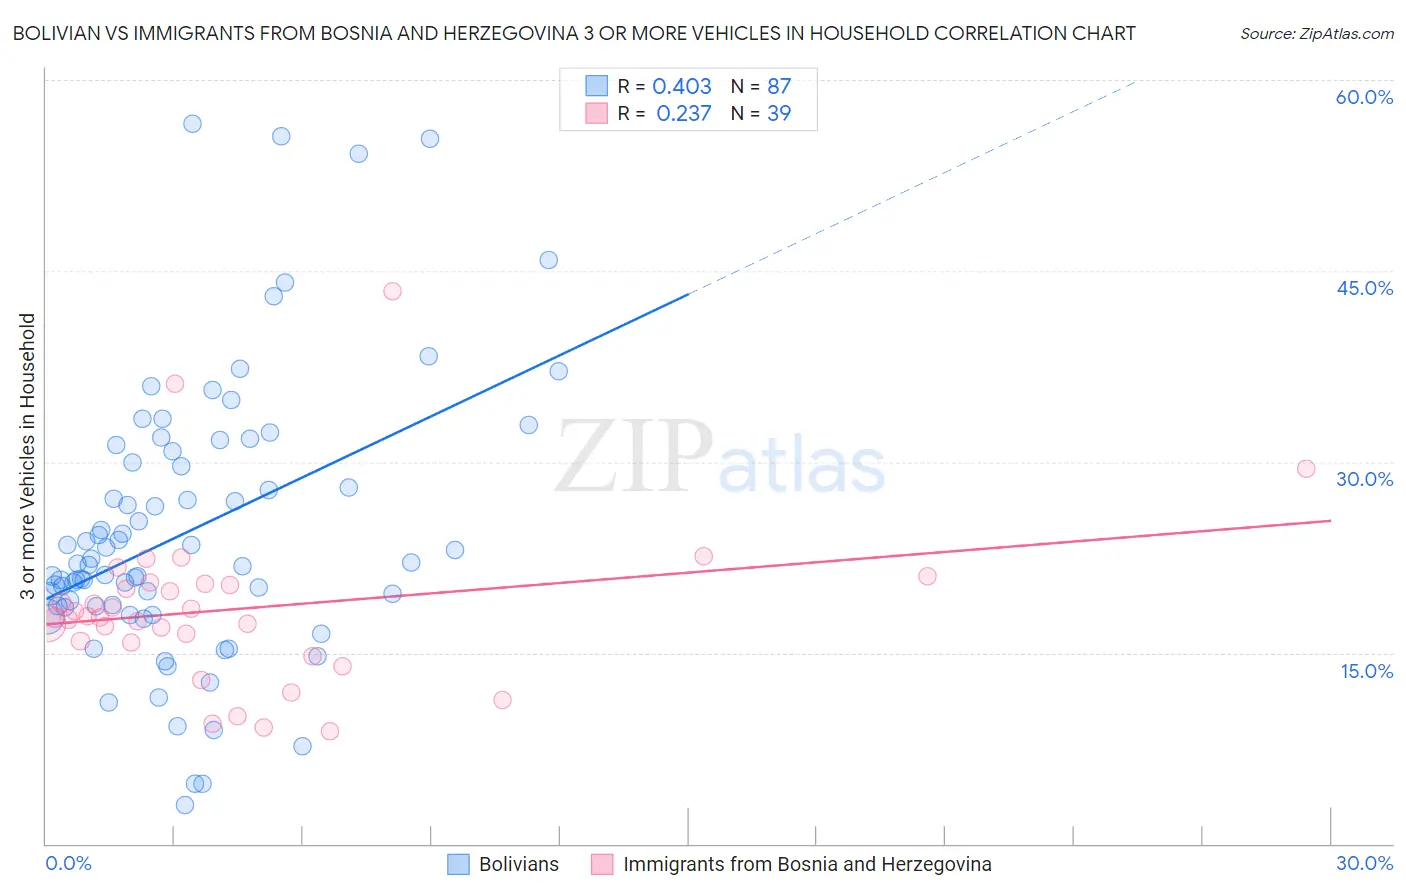 Bolivian vs Immigrants from Bosnia and Herzegovina 3 or more Vehicles in Household